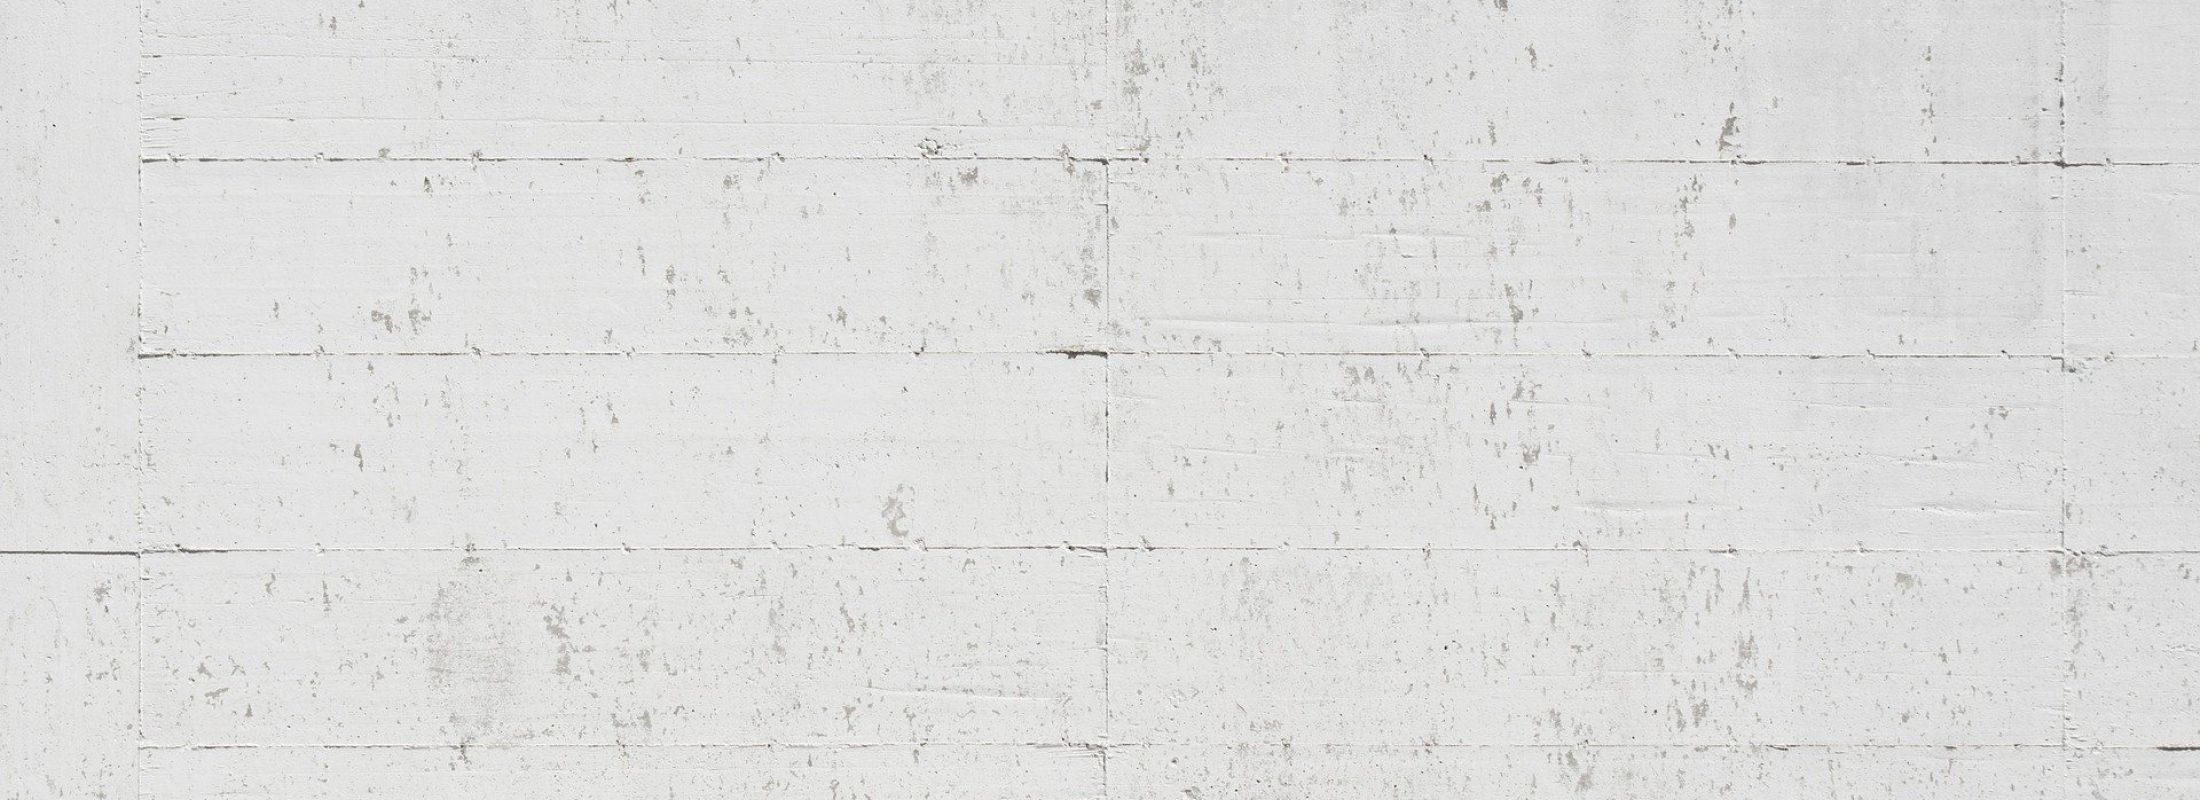 white-painted-concrete-wall-gf0116f20a_1920